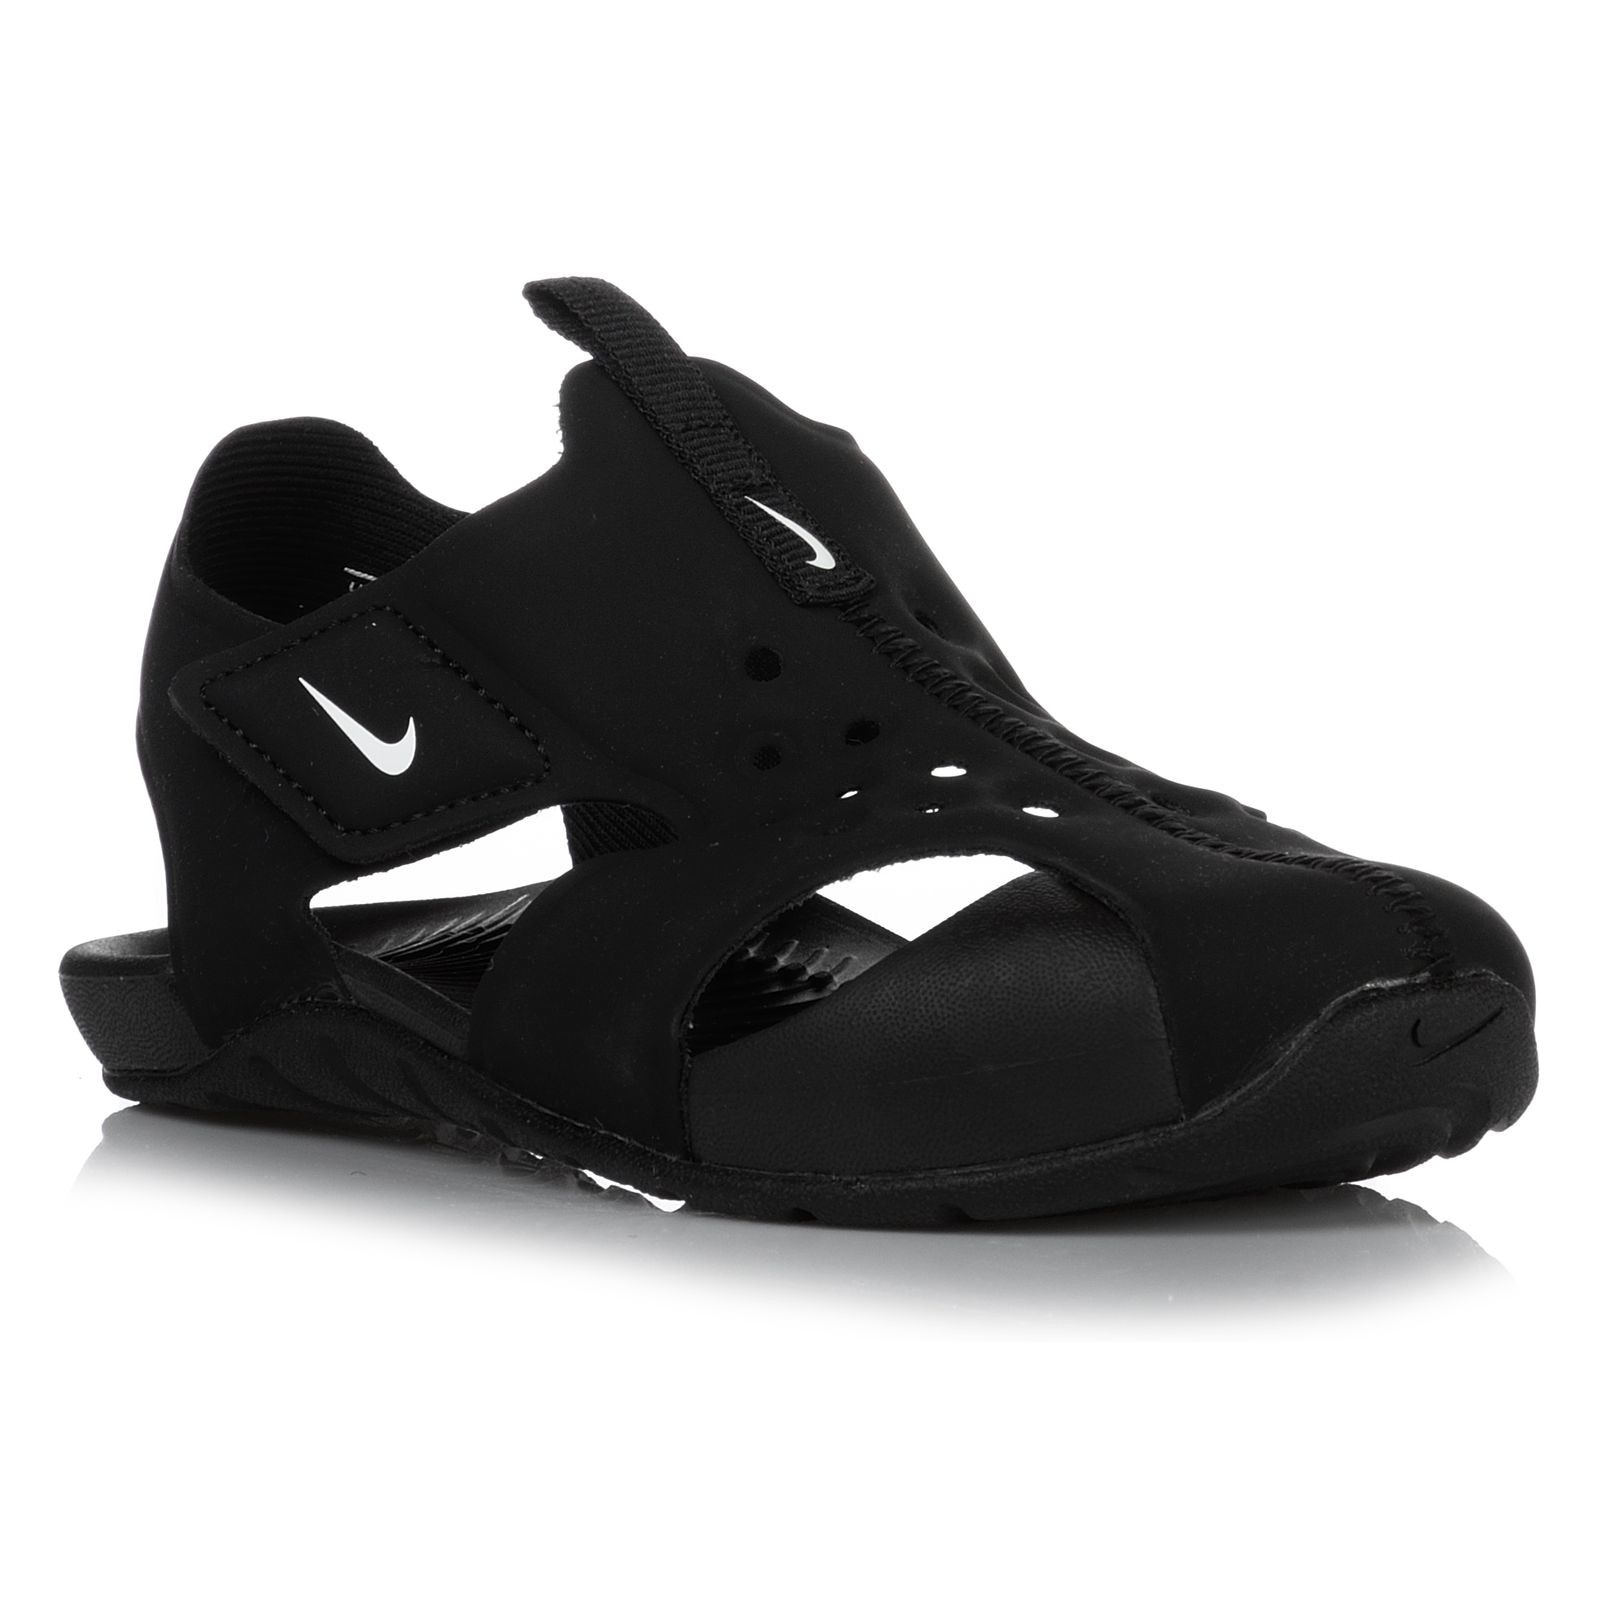 Compete lay off Torrent Sandale Nike SUNRAY PROTECT 2 (TD) 943827001 Copii, Negru, 25 - eMAG.ro